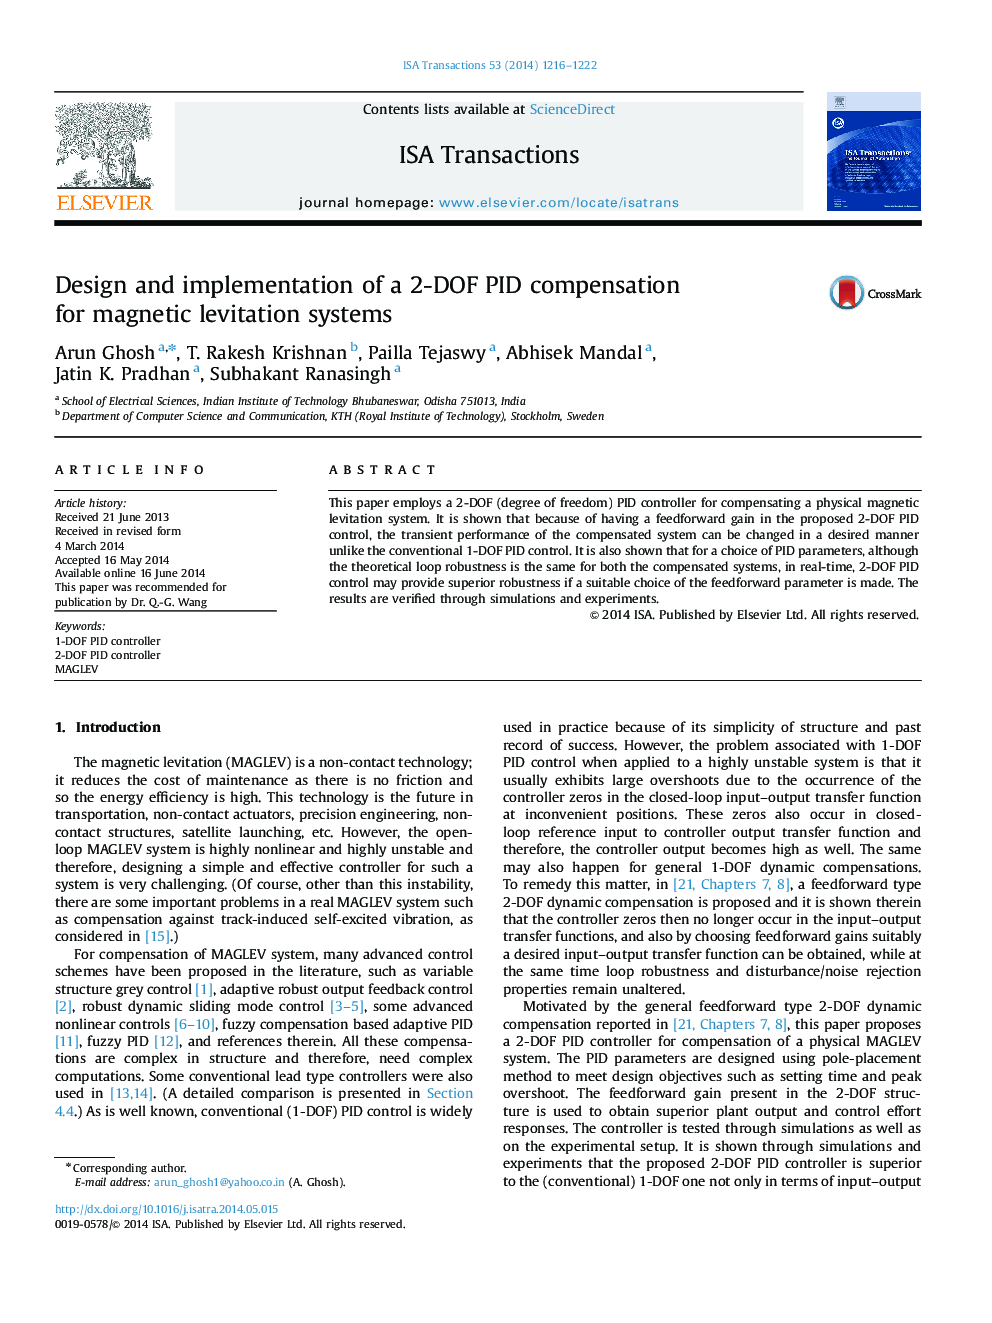 Design and implementation of a 2-DOF PID compensation for magnetic levitation systems